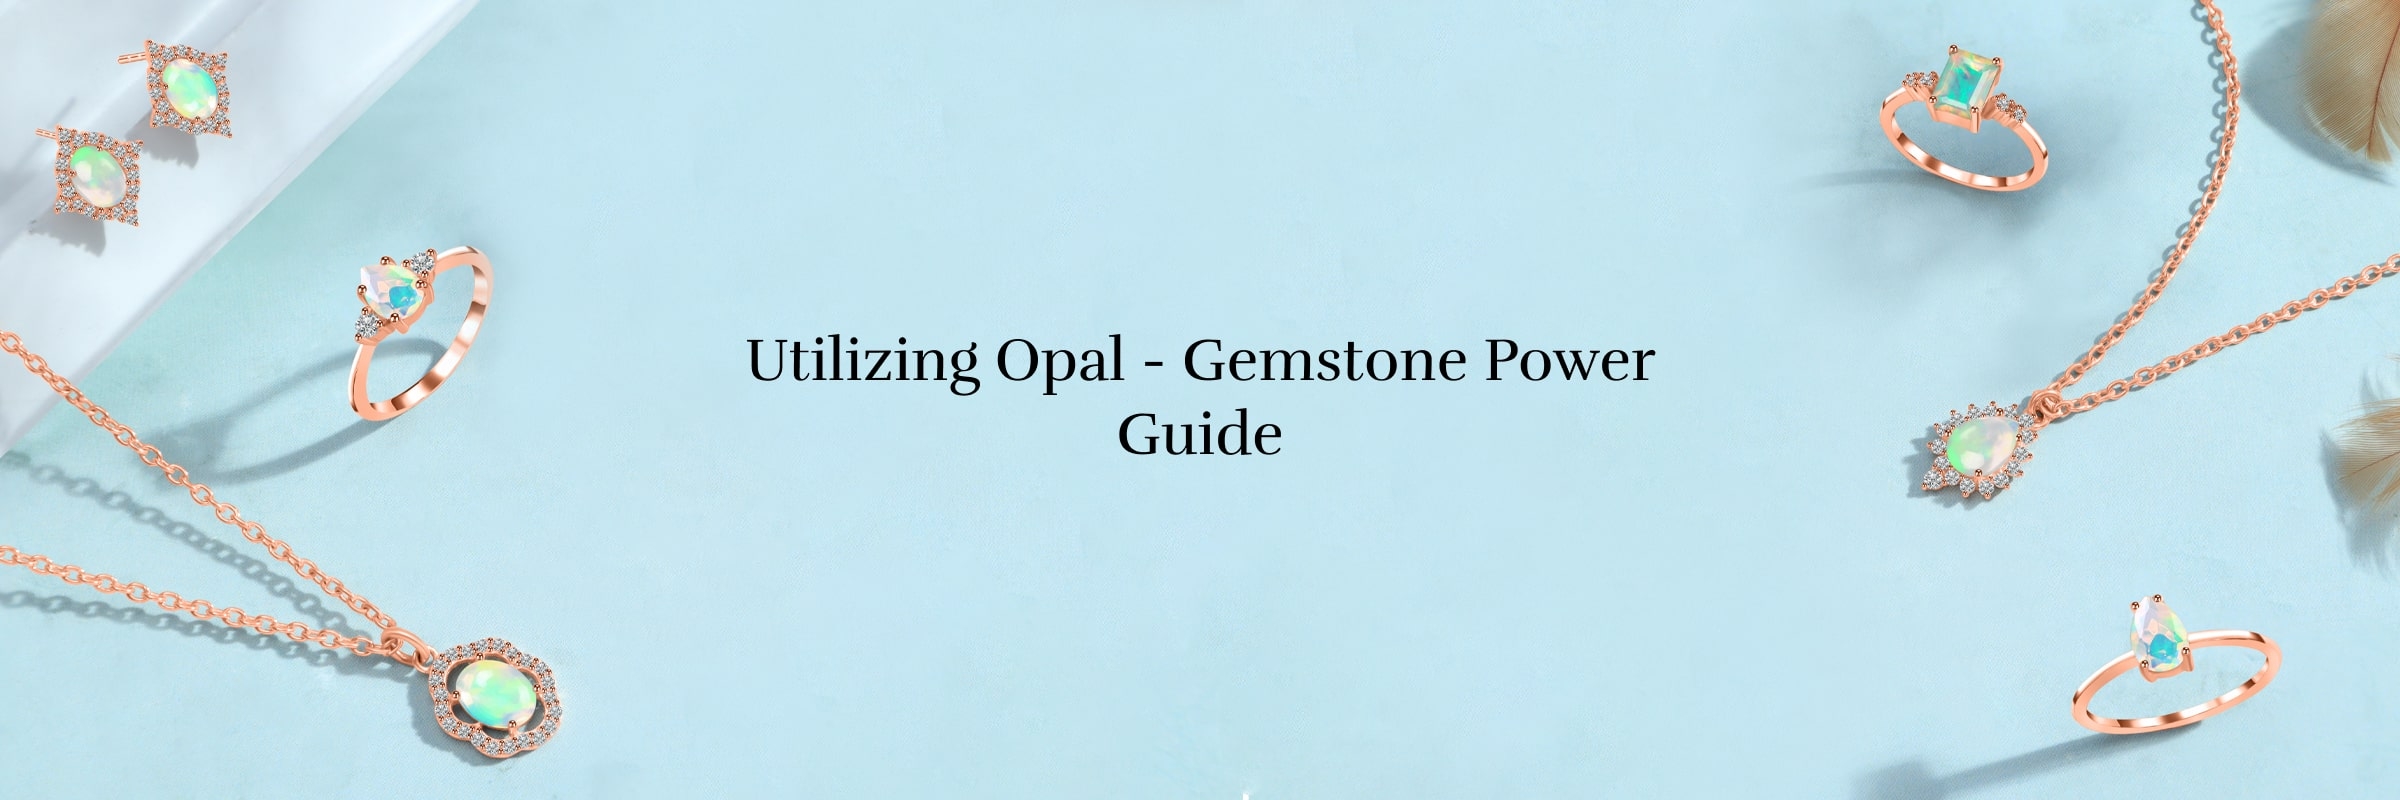 How to Use Opal Gemstones